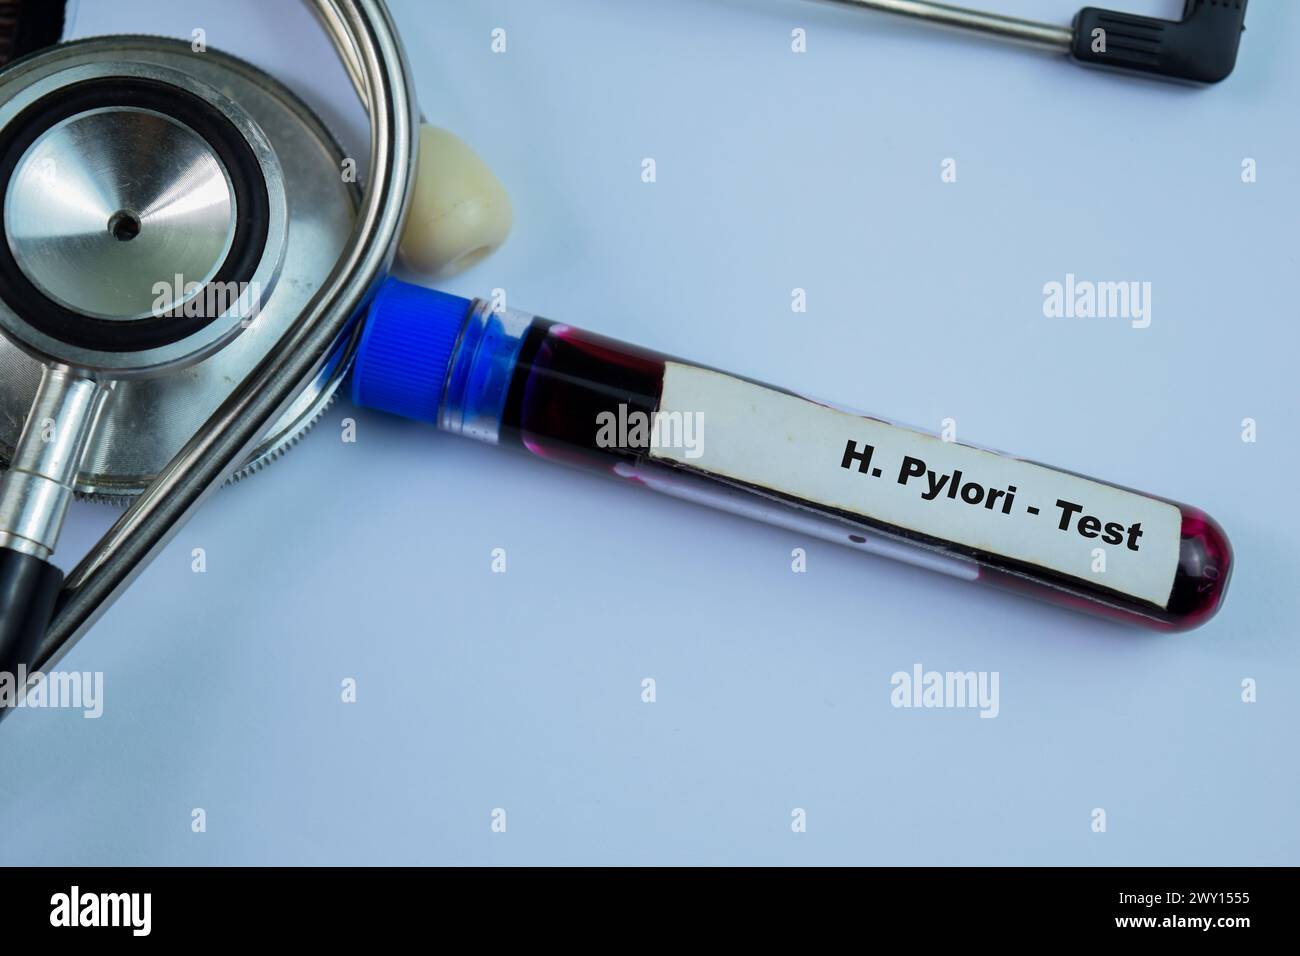 H. Pylori - Test with blood sample on wooden background. Healthcare or medical concept Stock Photo